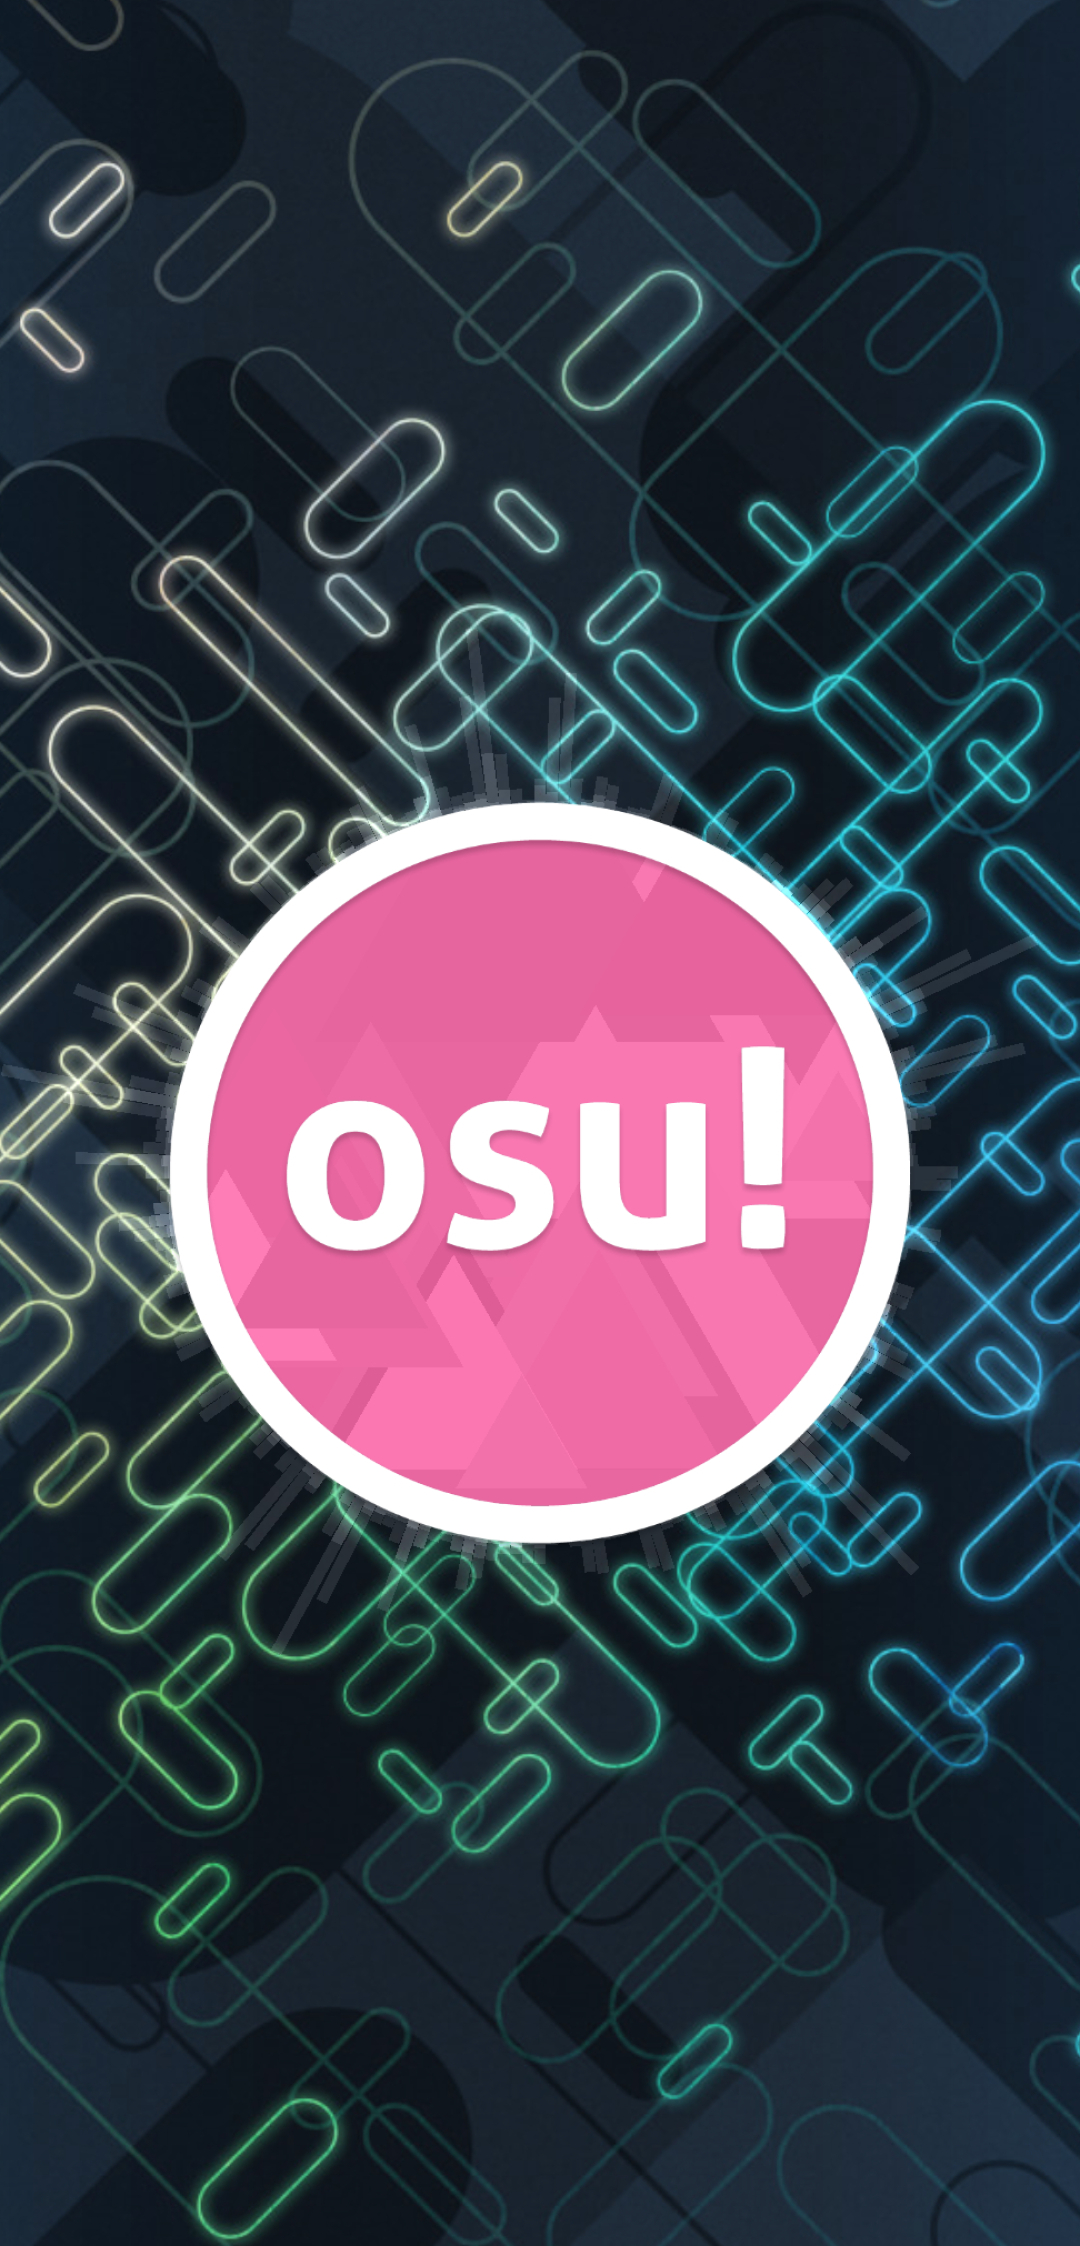 1080x2246 You get a really nice mobile wallpaper when using osu!lazer vertically (screenshotted on android, probably looks the same on pc too) : r/osugame